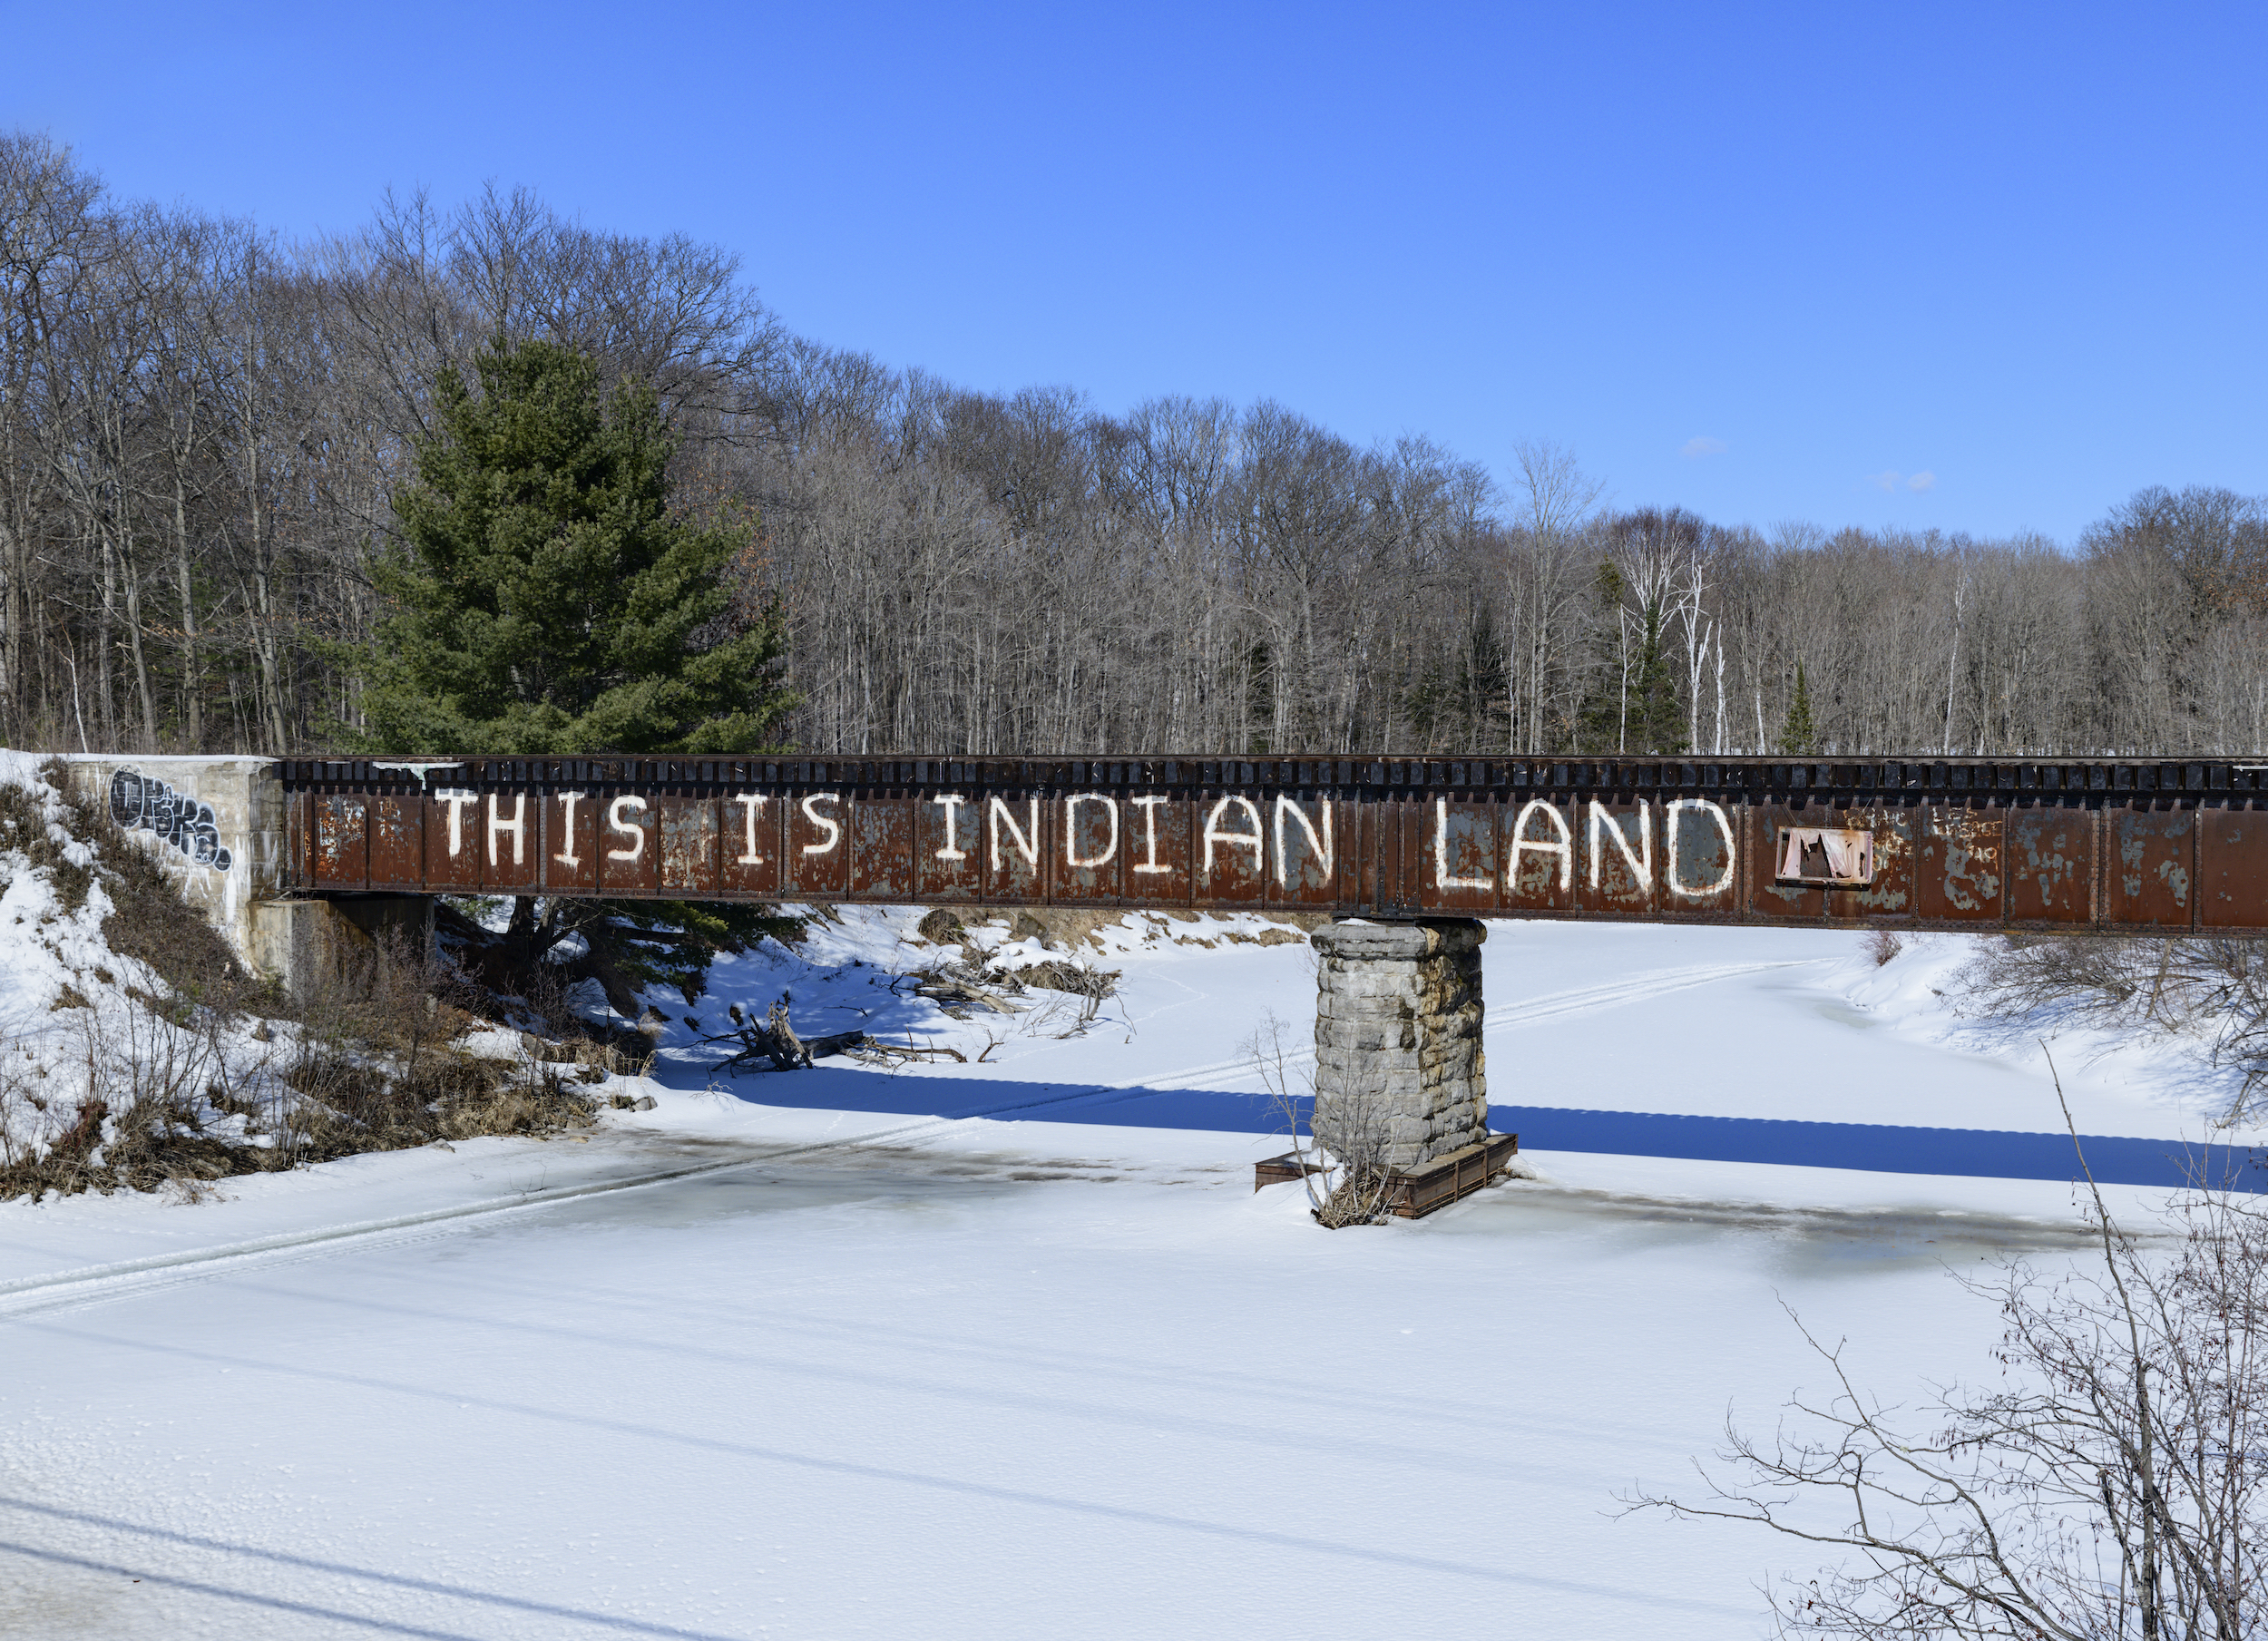 Garden River First Nation is part of a legal trust known as the First Nations of the Robinson Huron Treaty of 1850 is seeking billions in unpaid treaty annuities — annual payments to individual members of the 21 First Nations involved — in a case that could set legal precedents across the country by formally recognizing Indigenous interpretations of historic treaties.